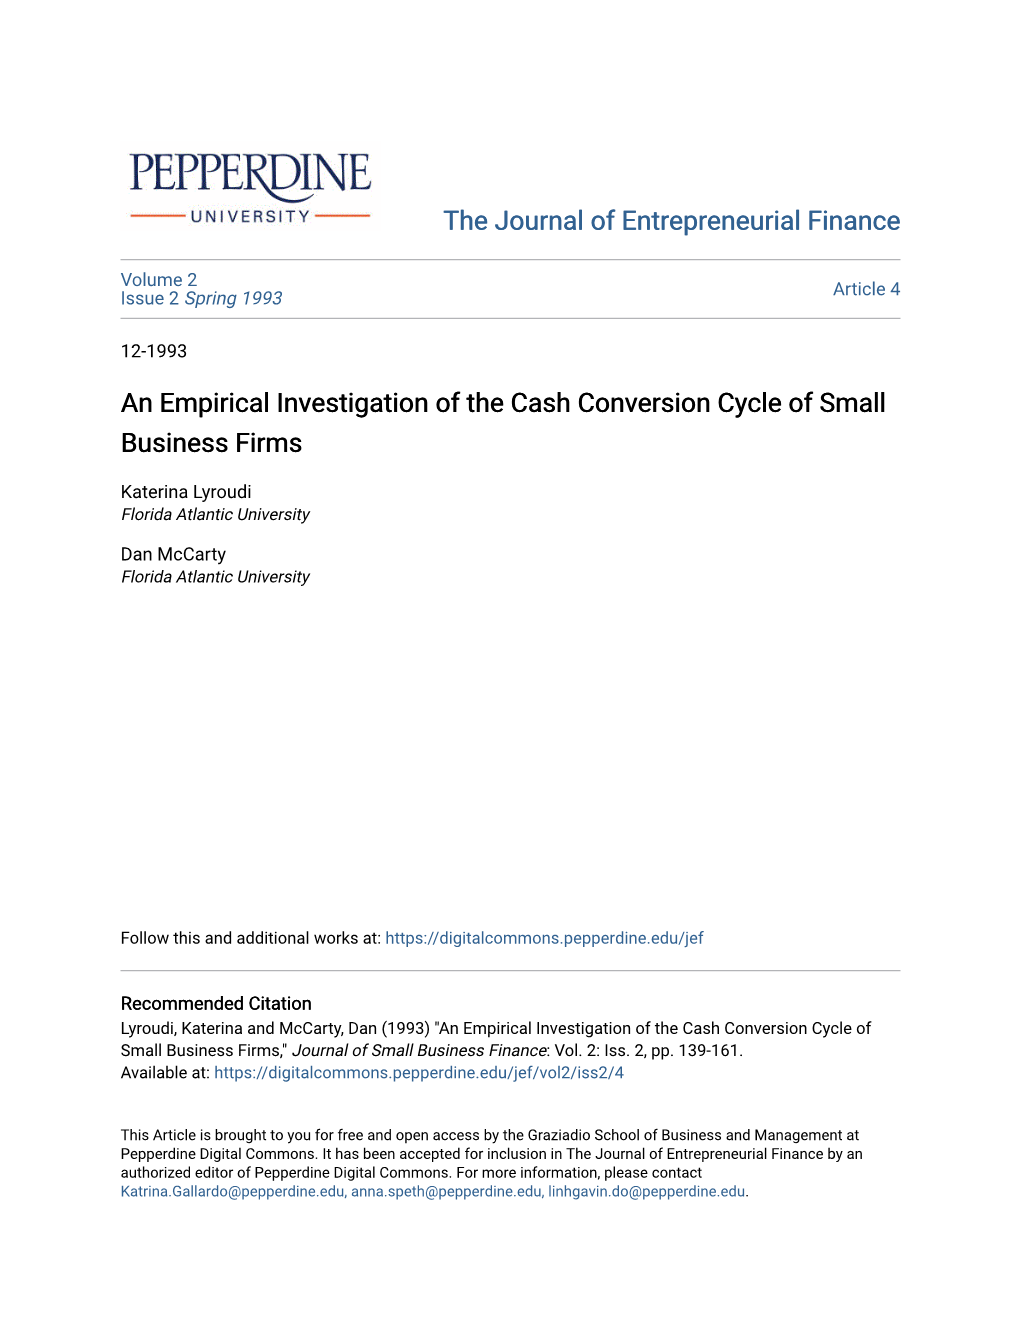 An Empirical Investigation of the Cash Conversion Cycle of Small Business Firms